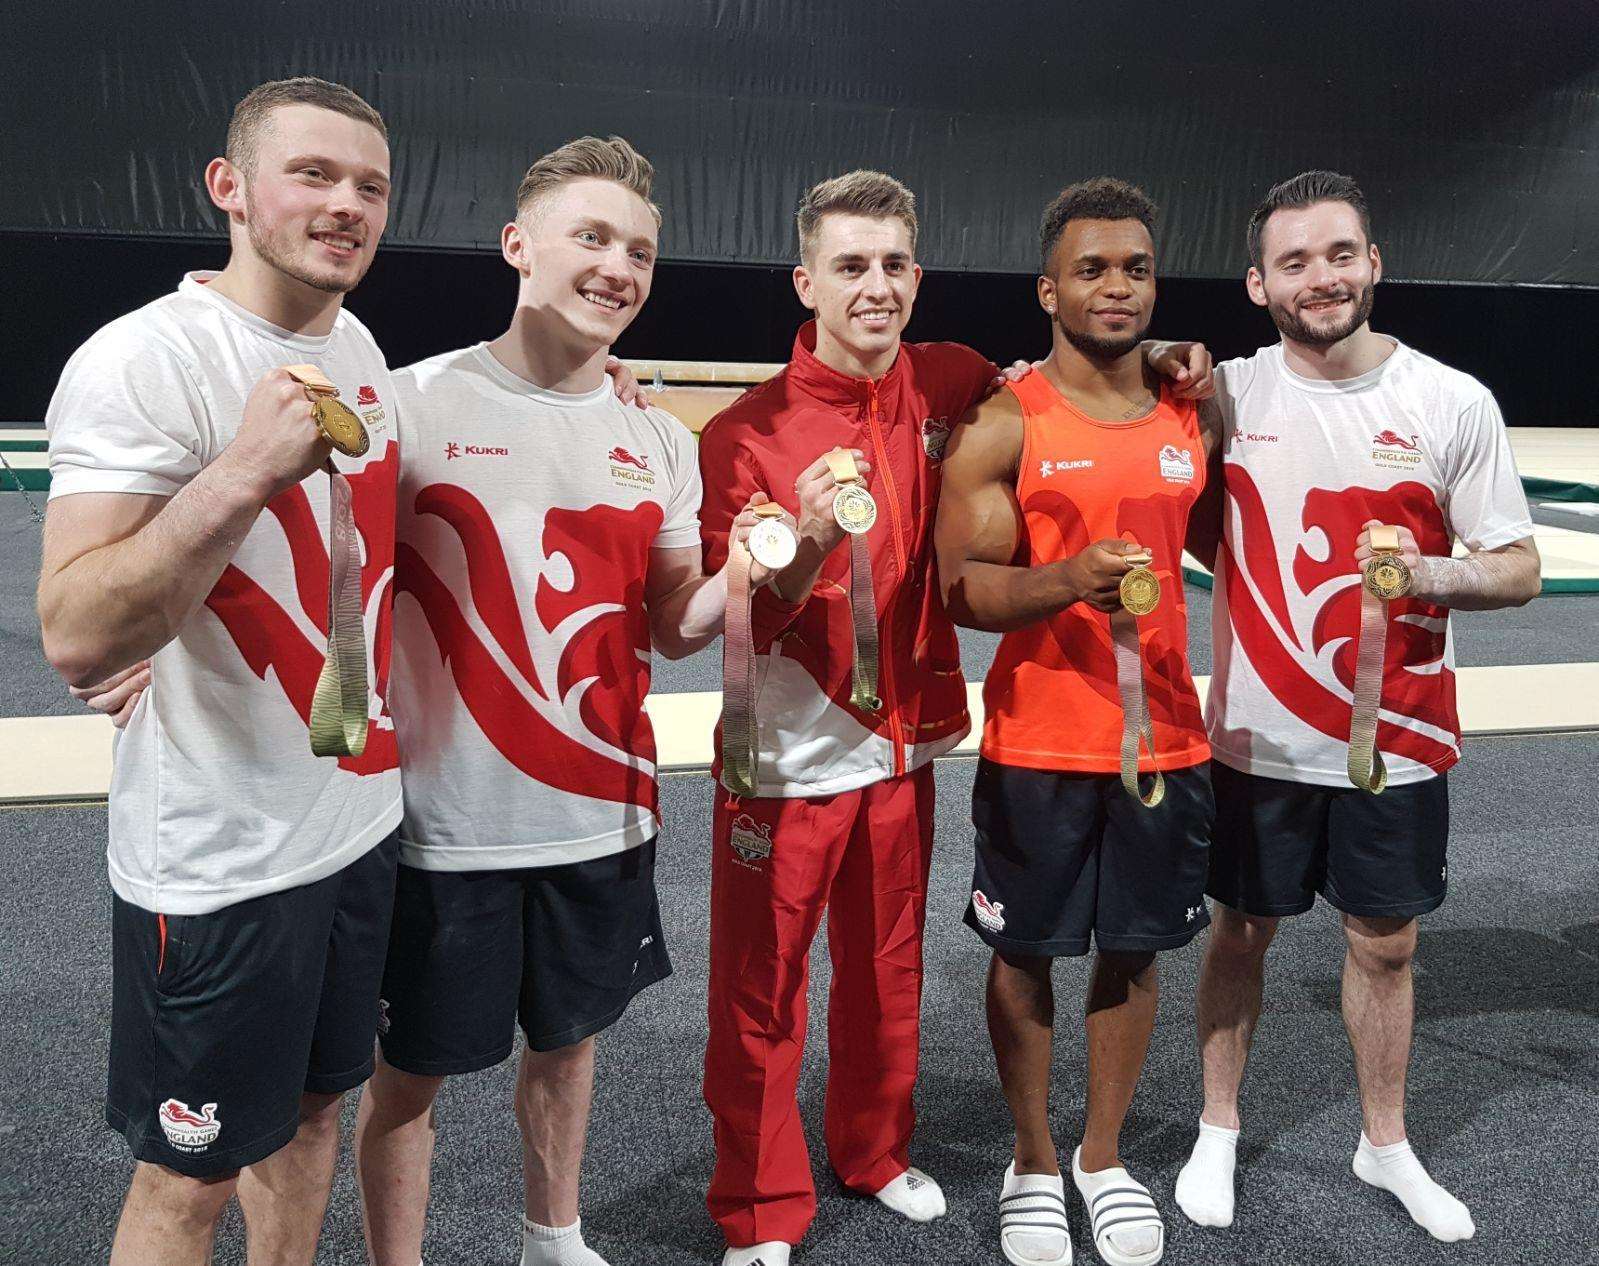 England team gold medallists Dom Cunningham, Nile Wilson, Max Whitlock, Courtney Tulloch and James Hall